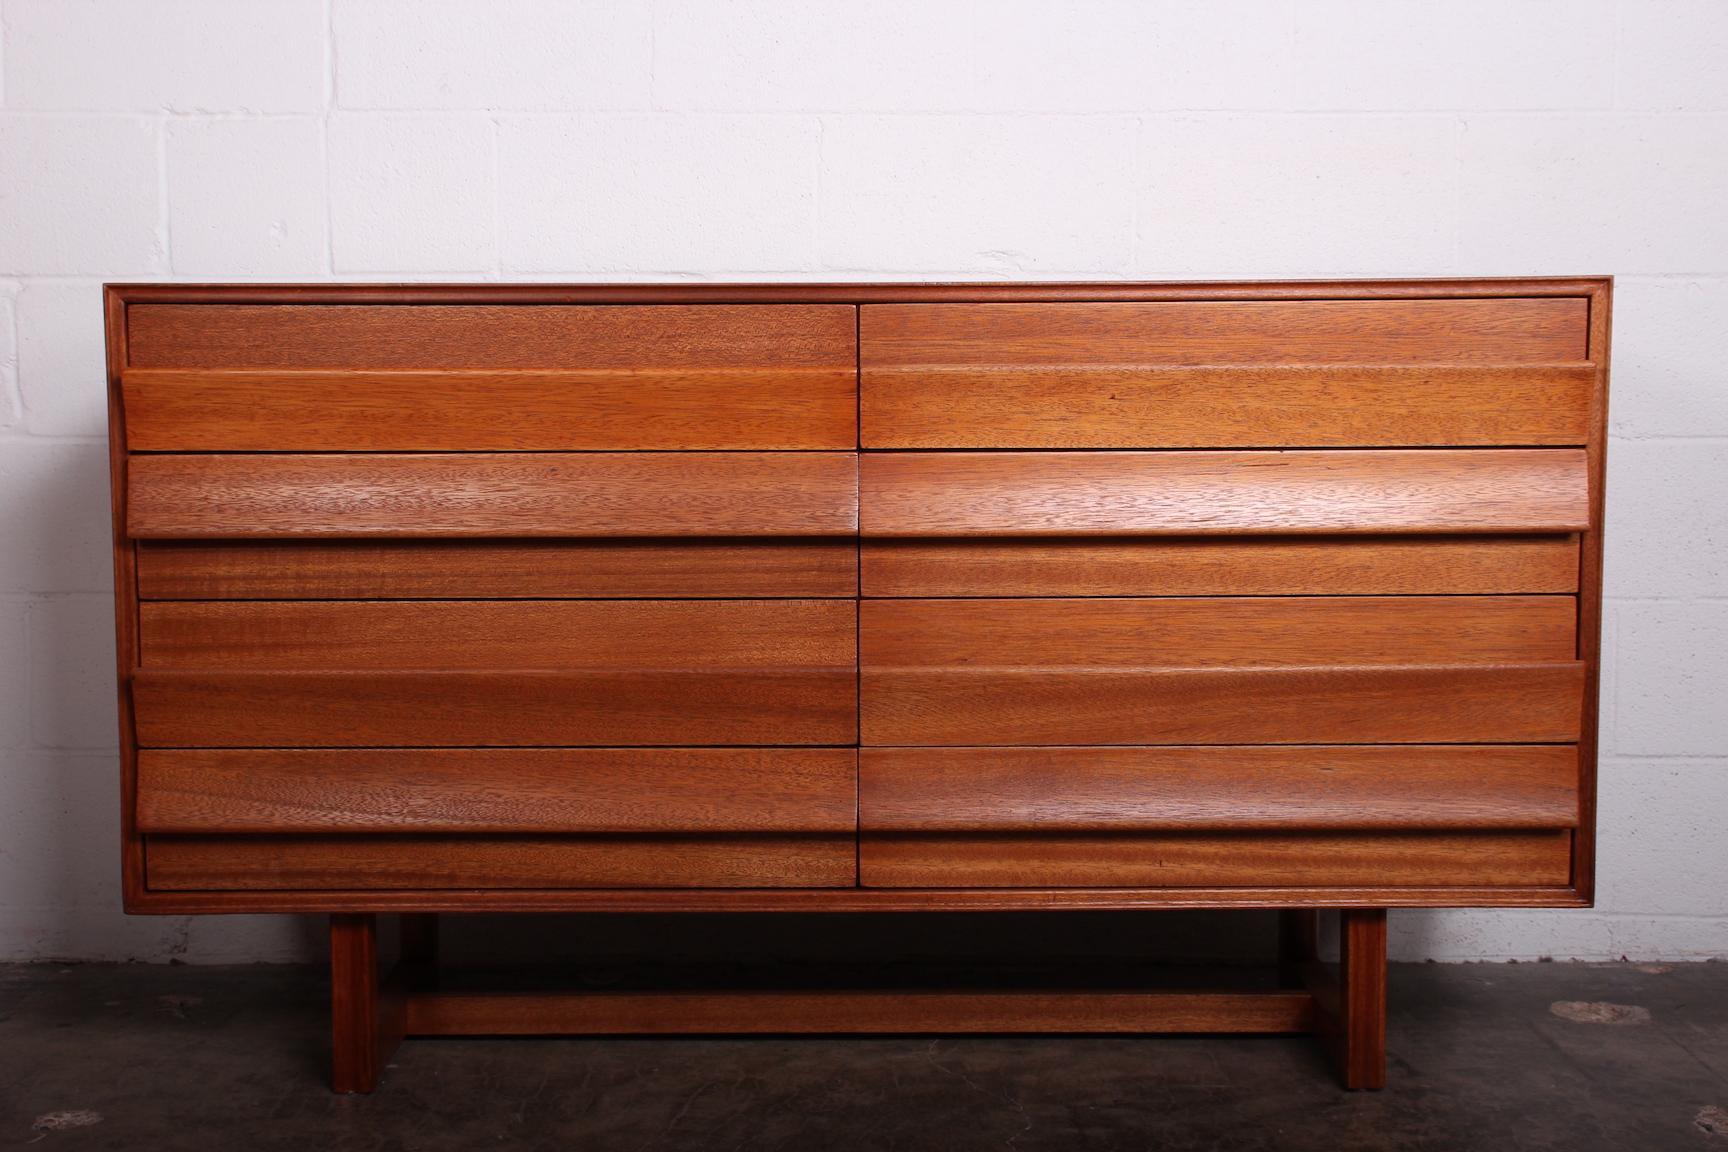 A mahogany chest of drawers designed by Paul Laszlo for Brown Saltman.